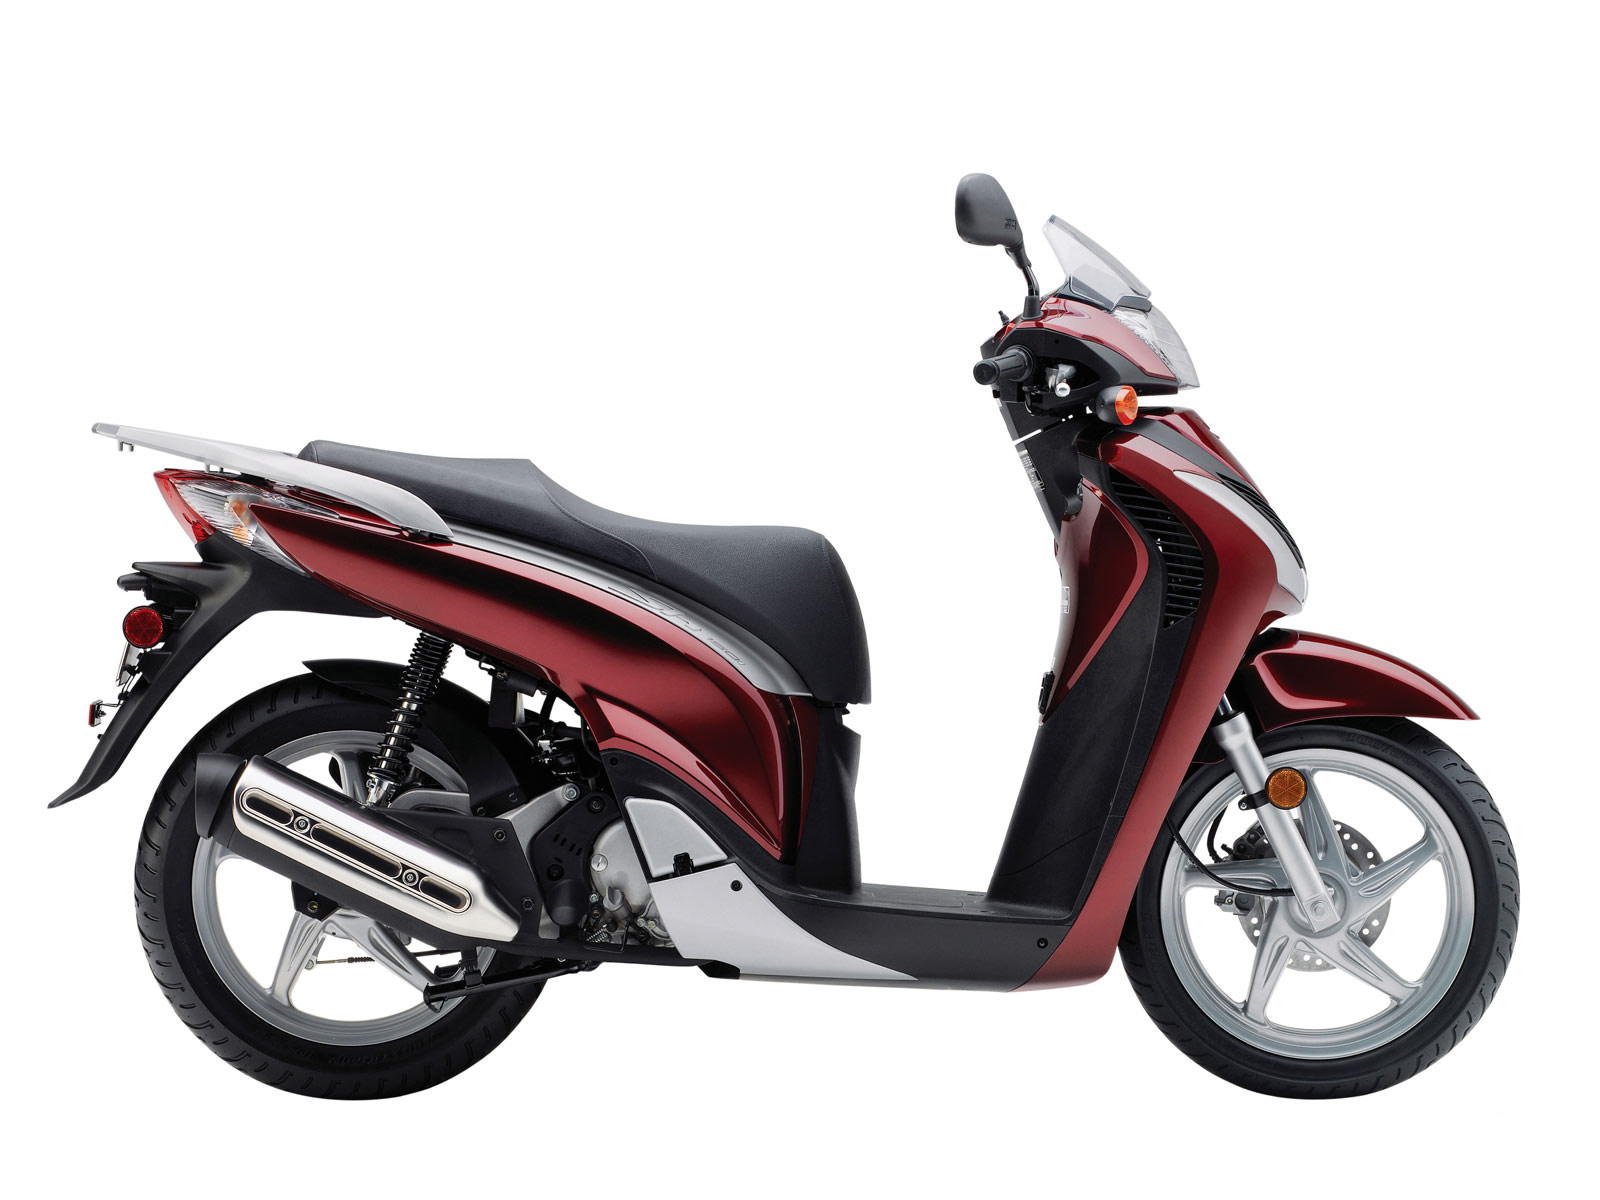 2010 HONDA SH-150i scooter wallpapers, specifications